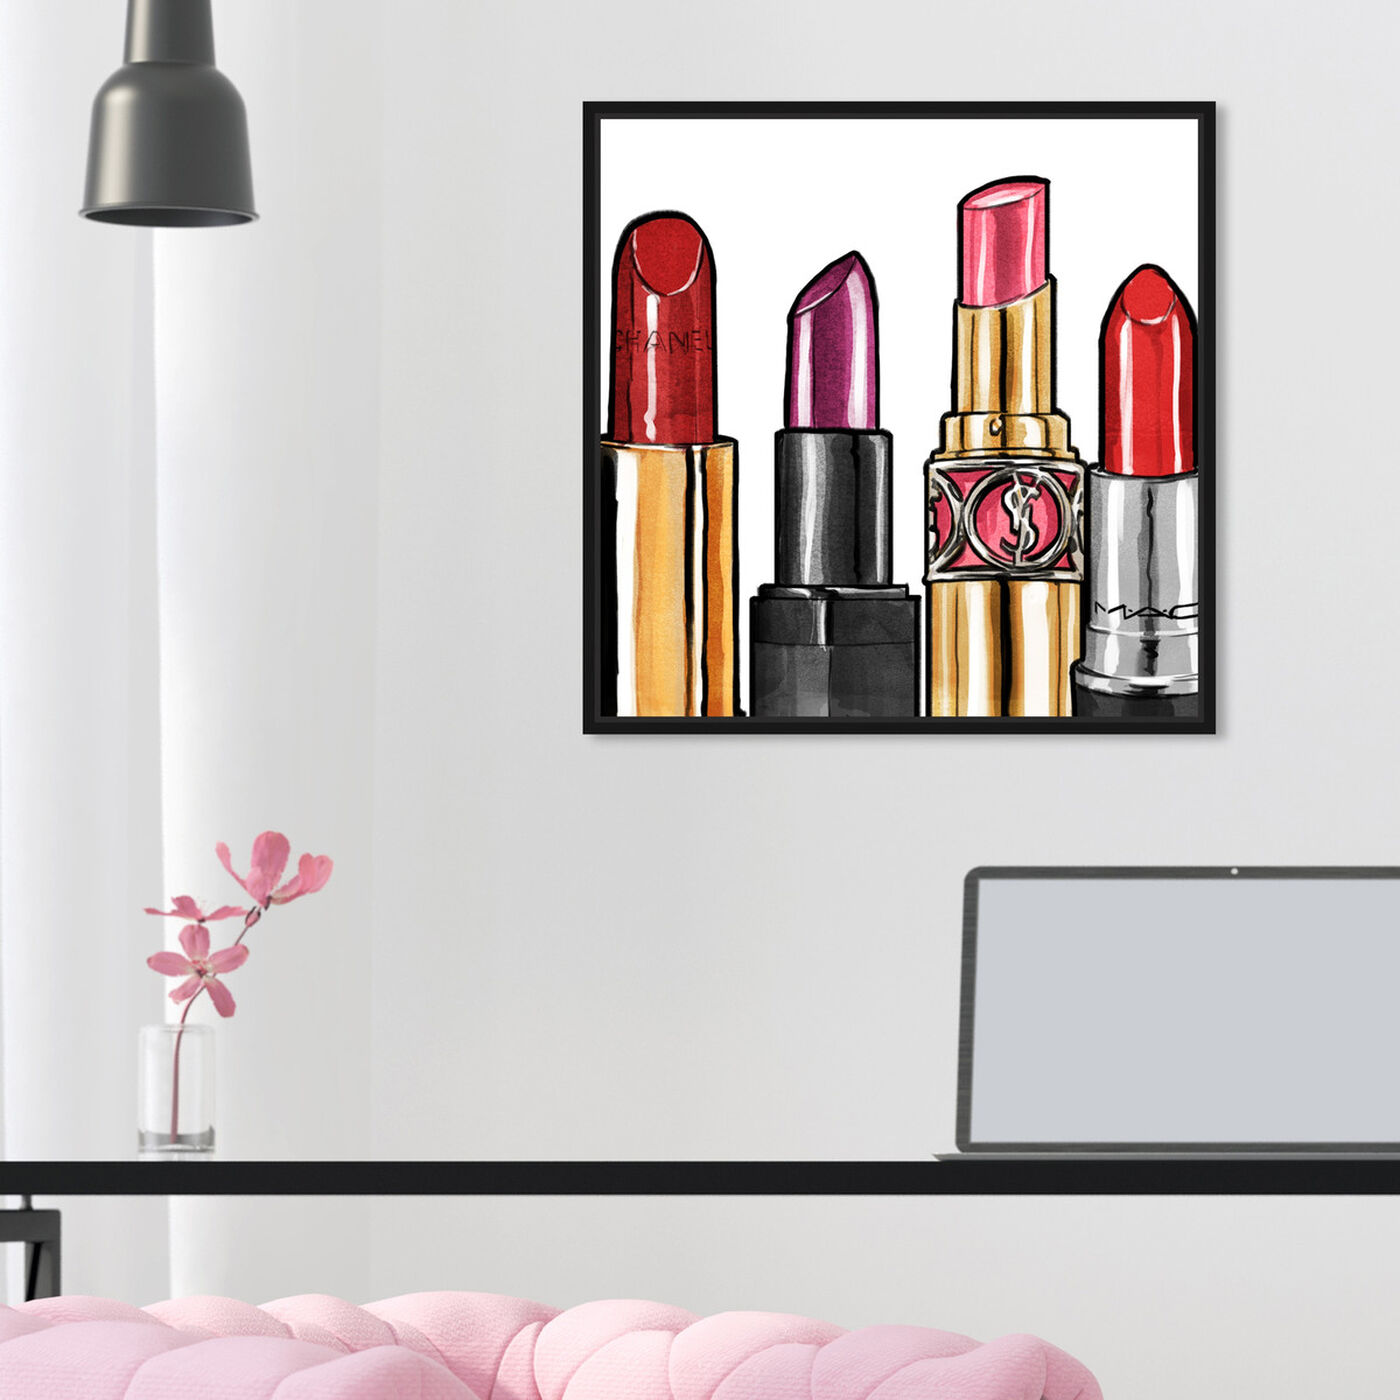 Hanging view of Red Lipstick featuring fashion and glam and makeup art.